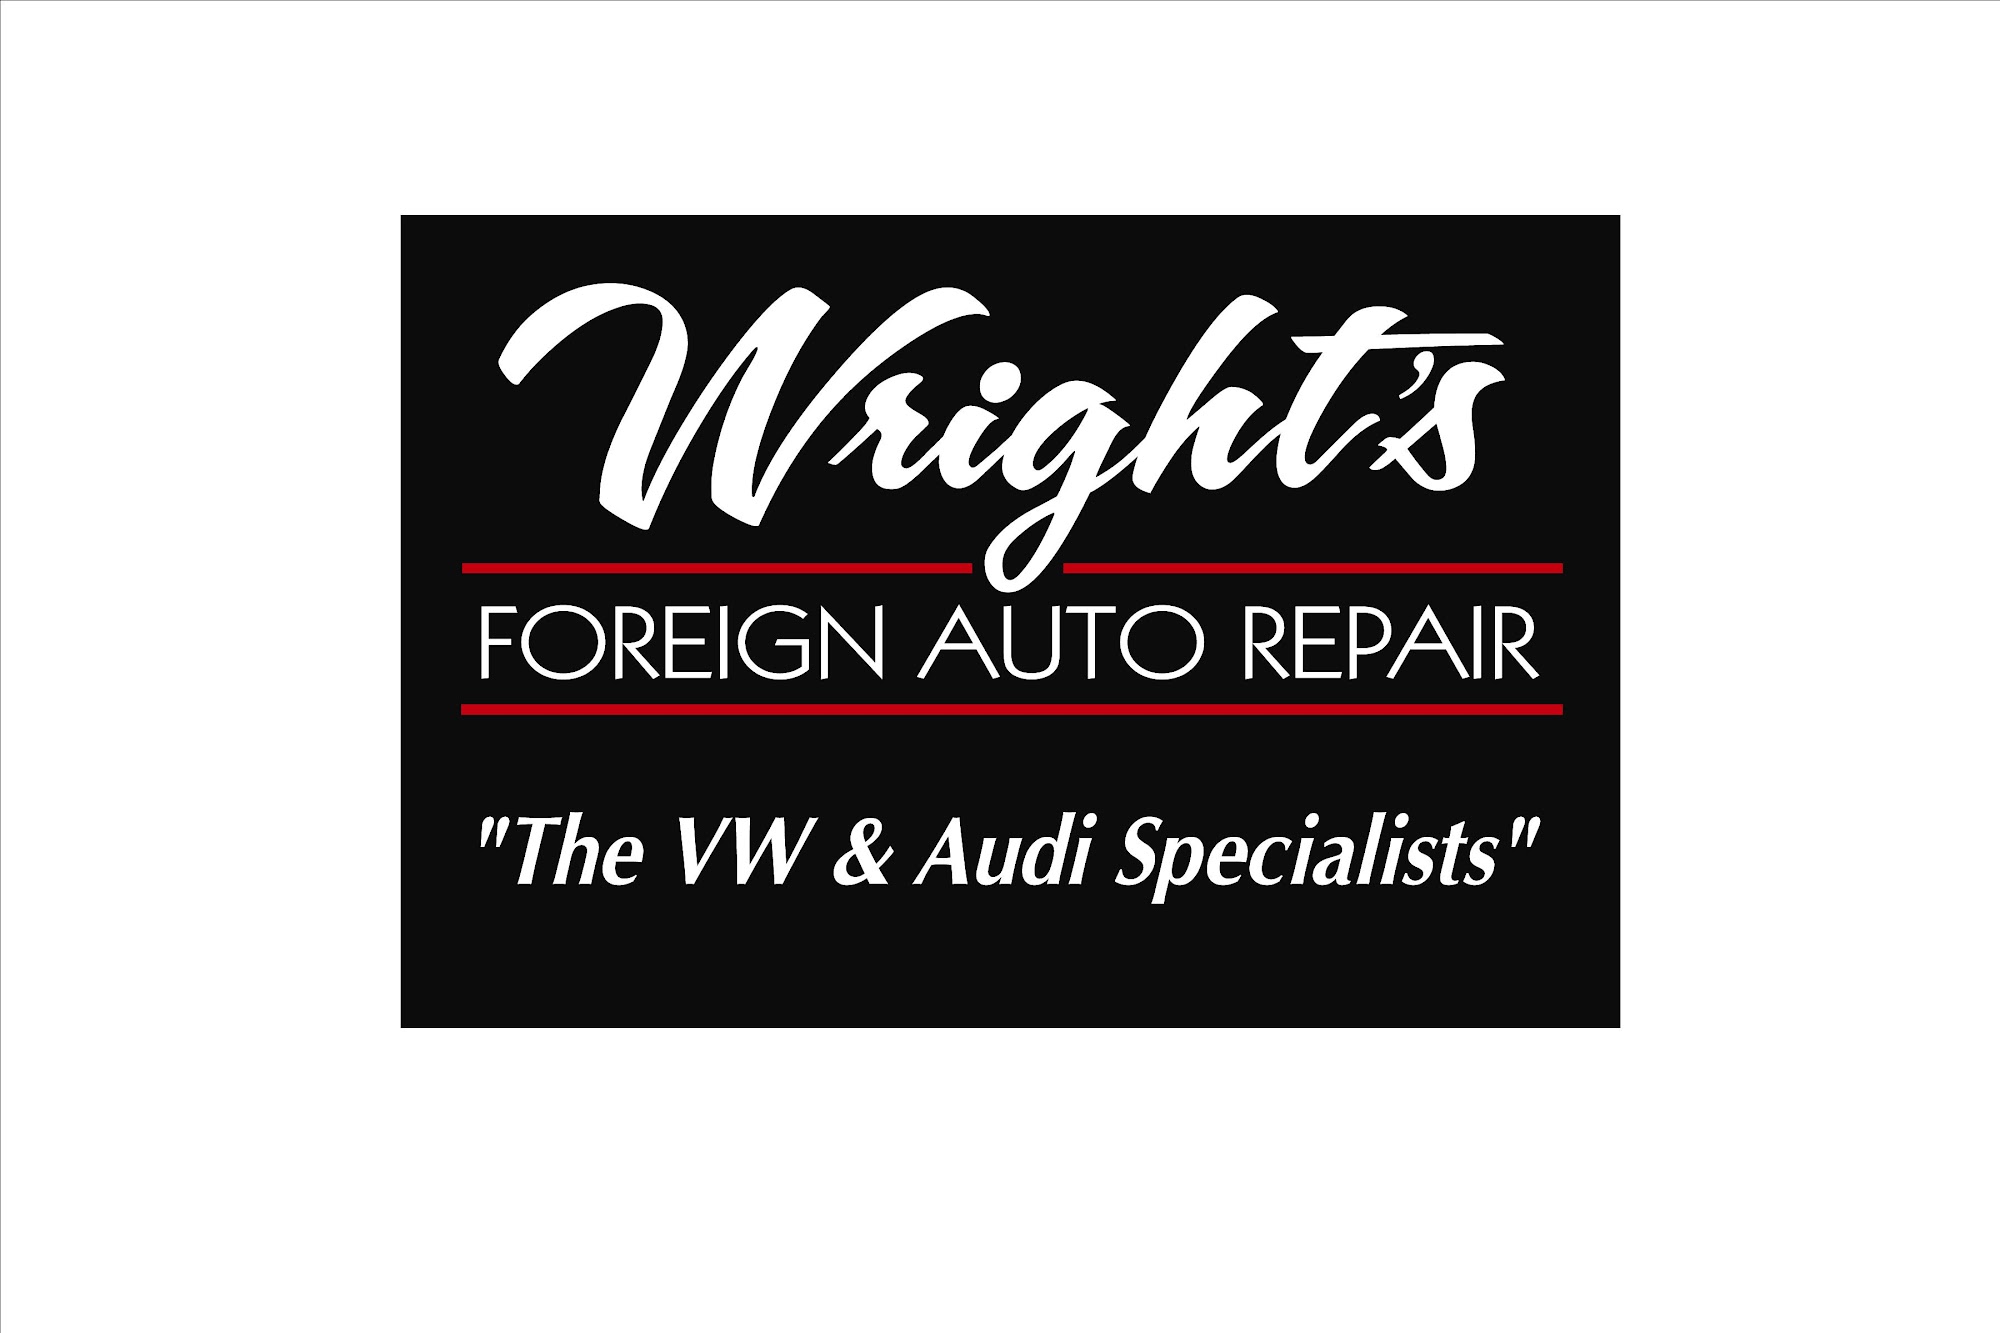 Wright's Foreign Auto Repair